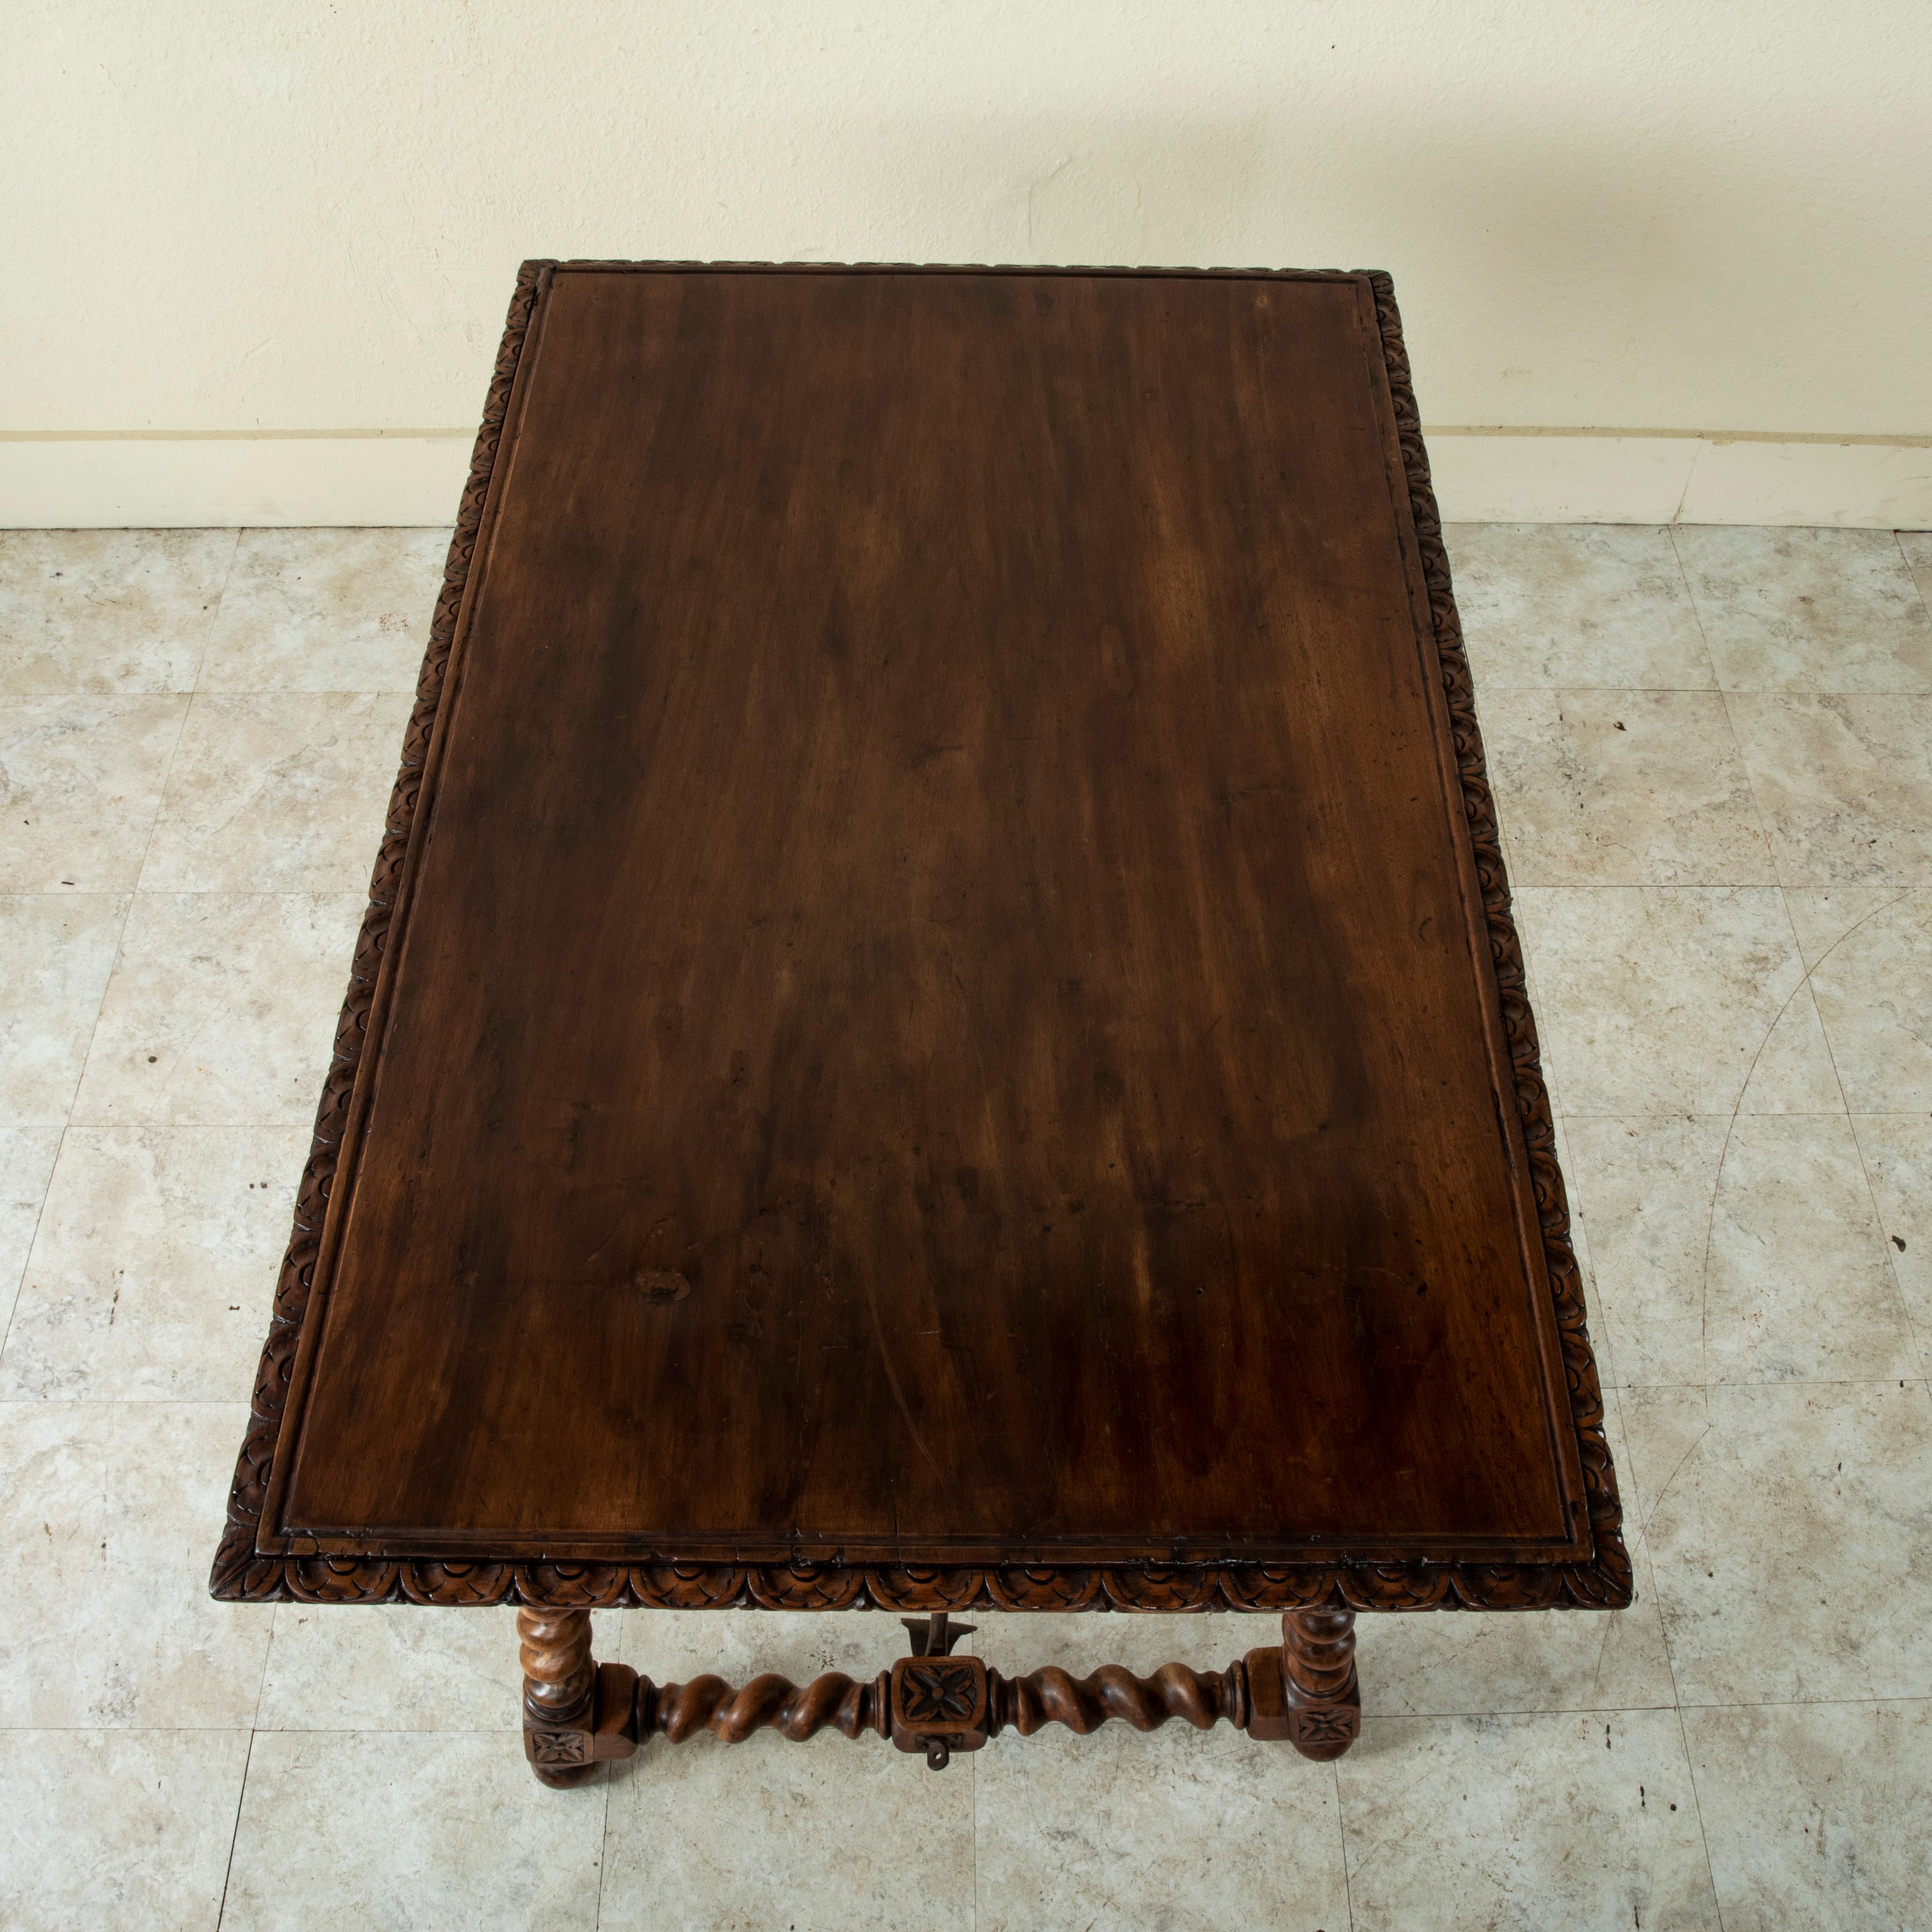 19th Century Spanish Renaissance Style Walnut Table with Forged Iron Stretcher In Good Condition For Sale In Fayetteville, AR